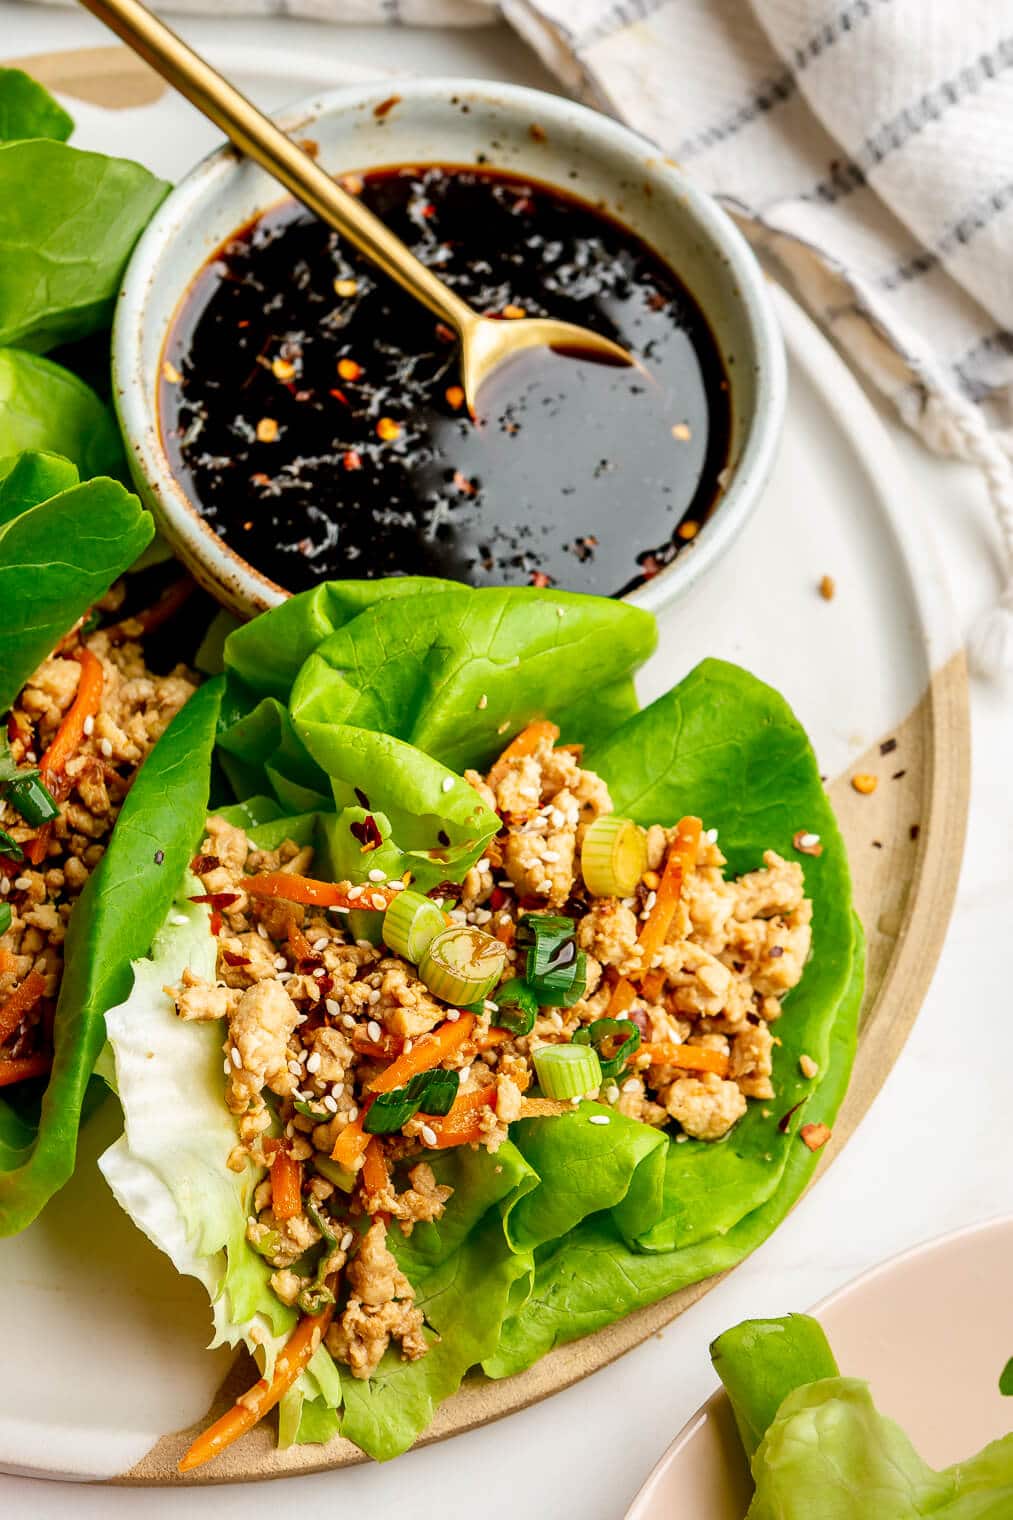 Three lettuce wraps on a plate with a bowl of dark, thick, sticky dipping sauce.